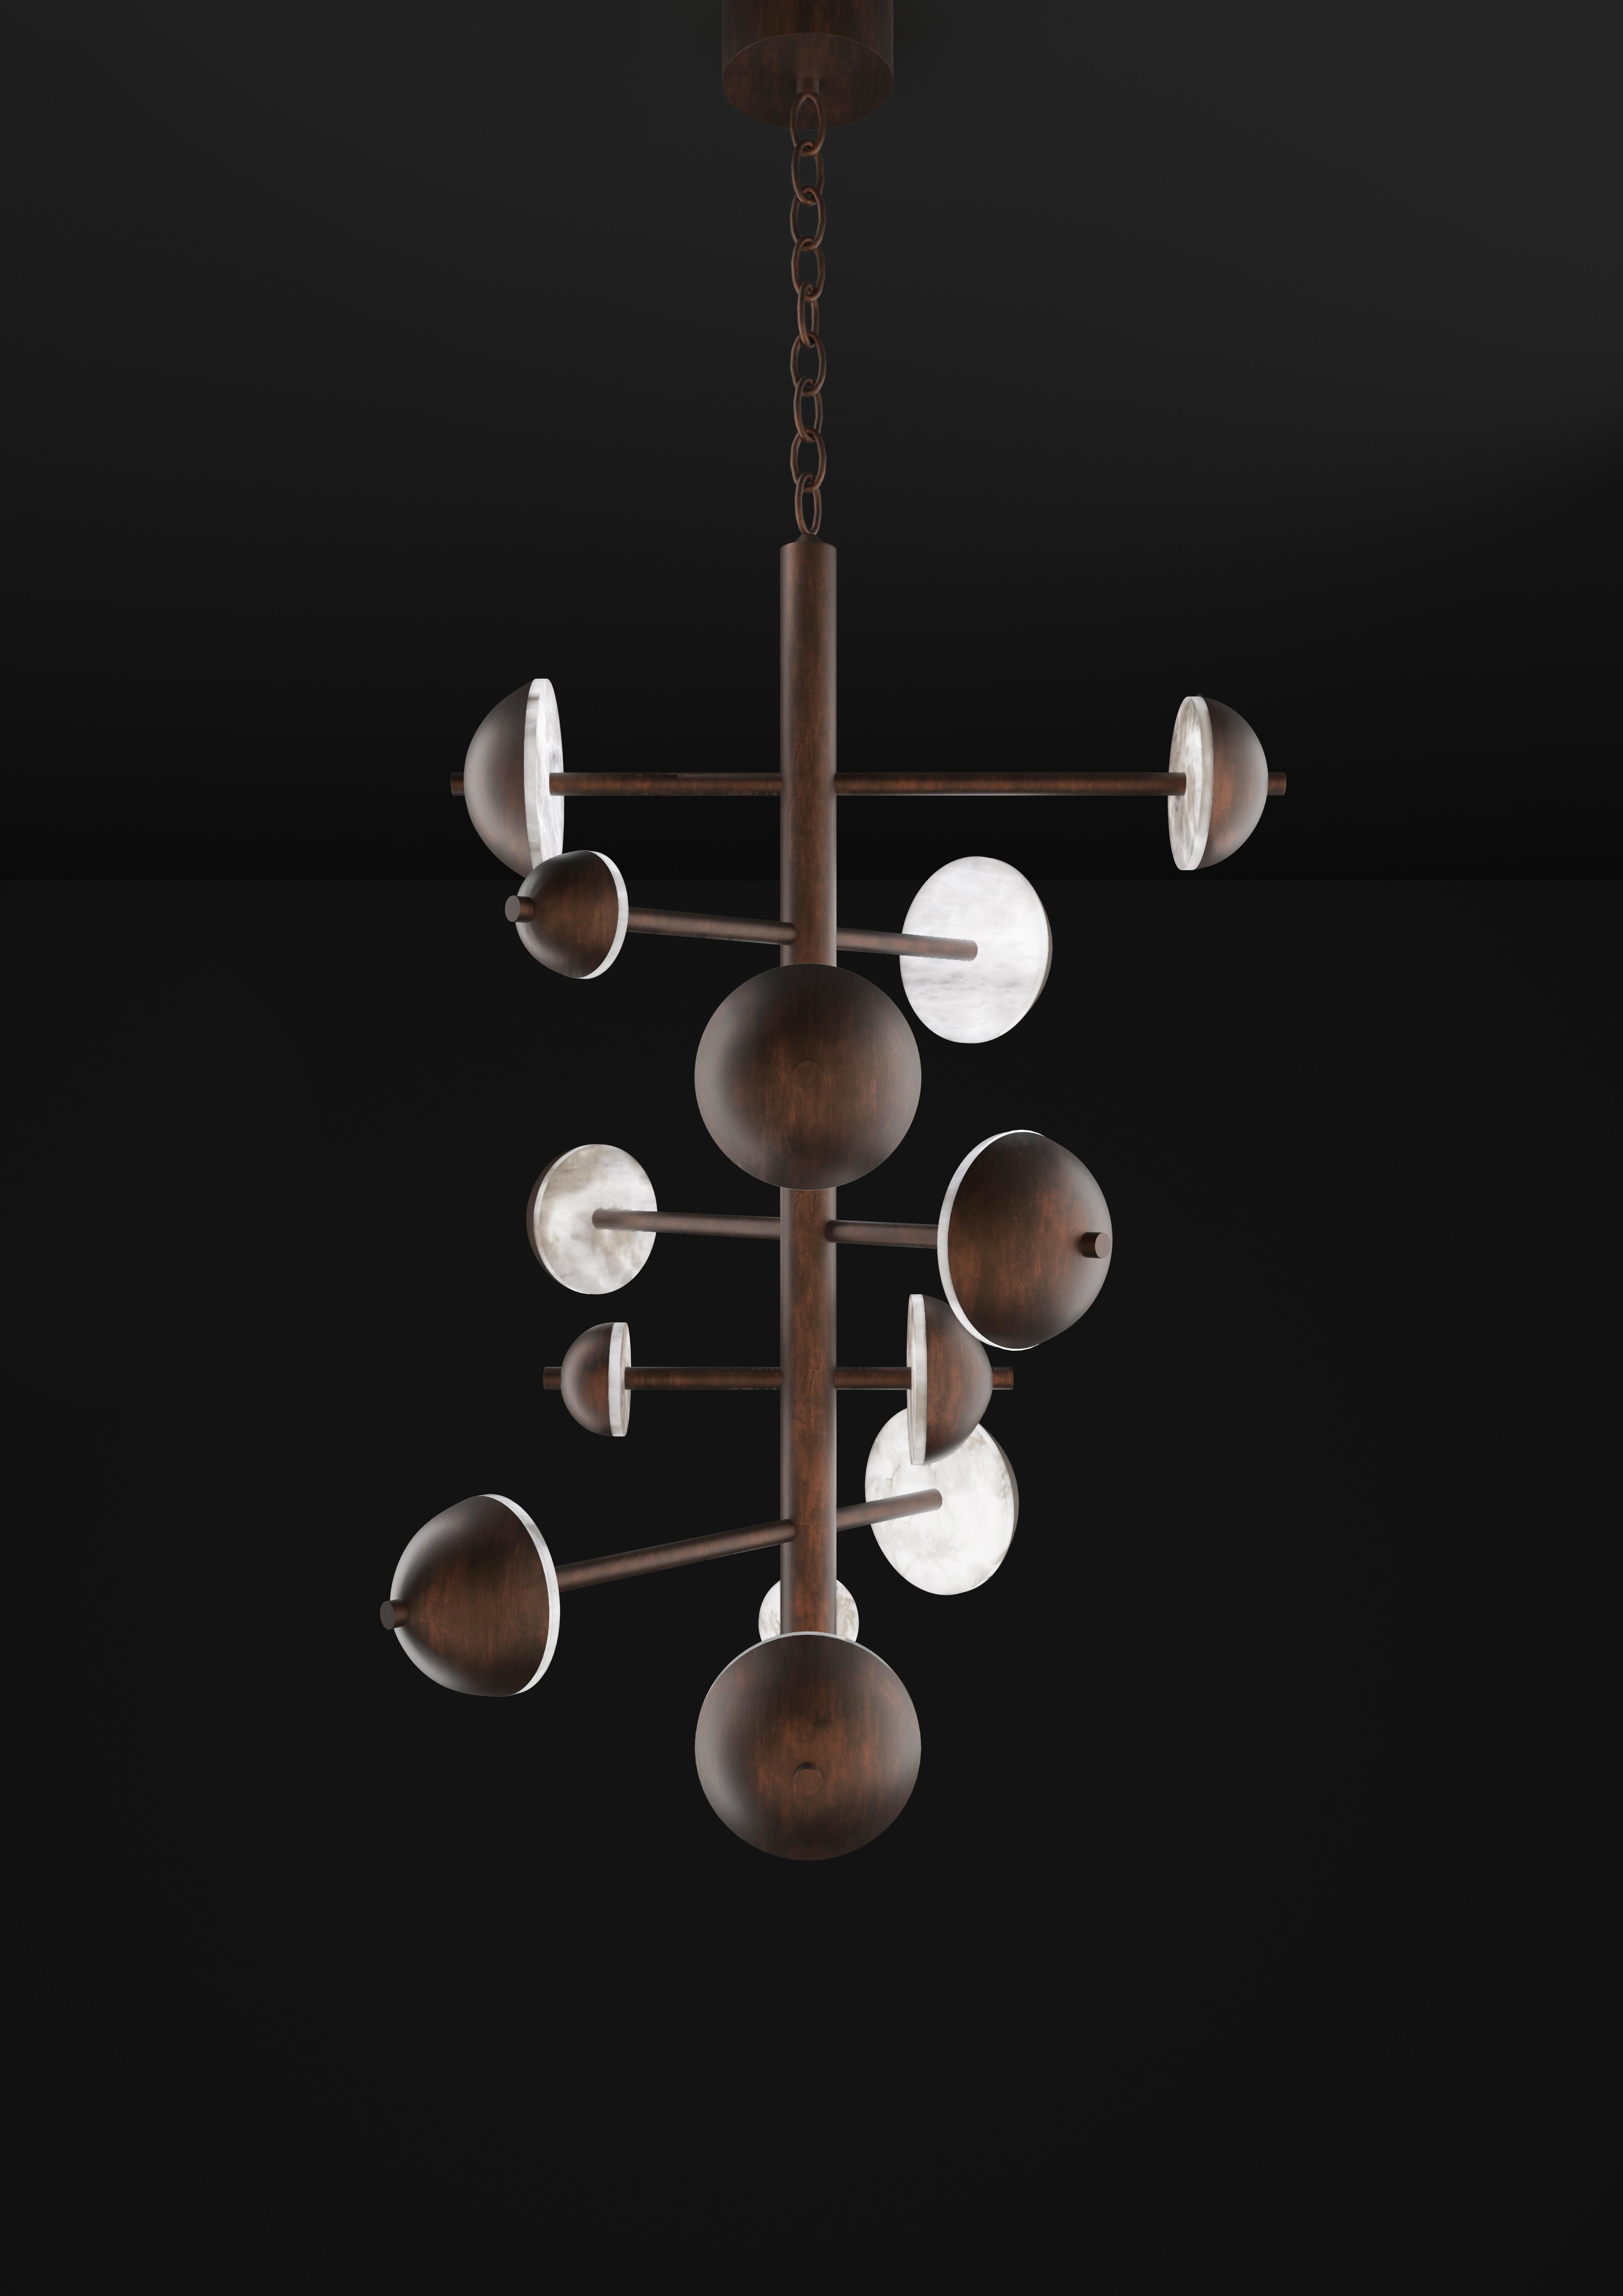 Ares Ruggine Of Florence Metal Chandelier by Alabastro Italiano
Dimensions: D 74,5 x W 73 x H 110 cm.
Materials: White alabaster and metal.

Available in different finishes: Shiny Silver, Bronze, Brushed Brass, Ruggine of Florence, Brushed